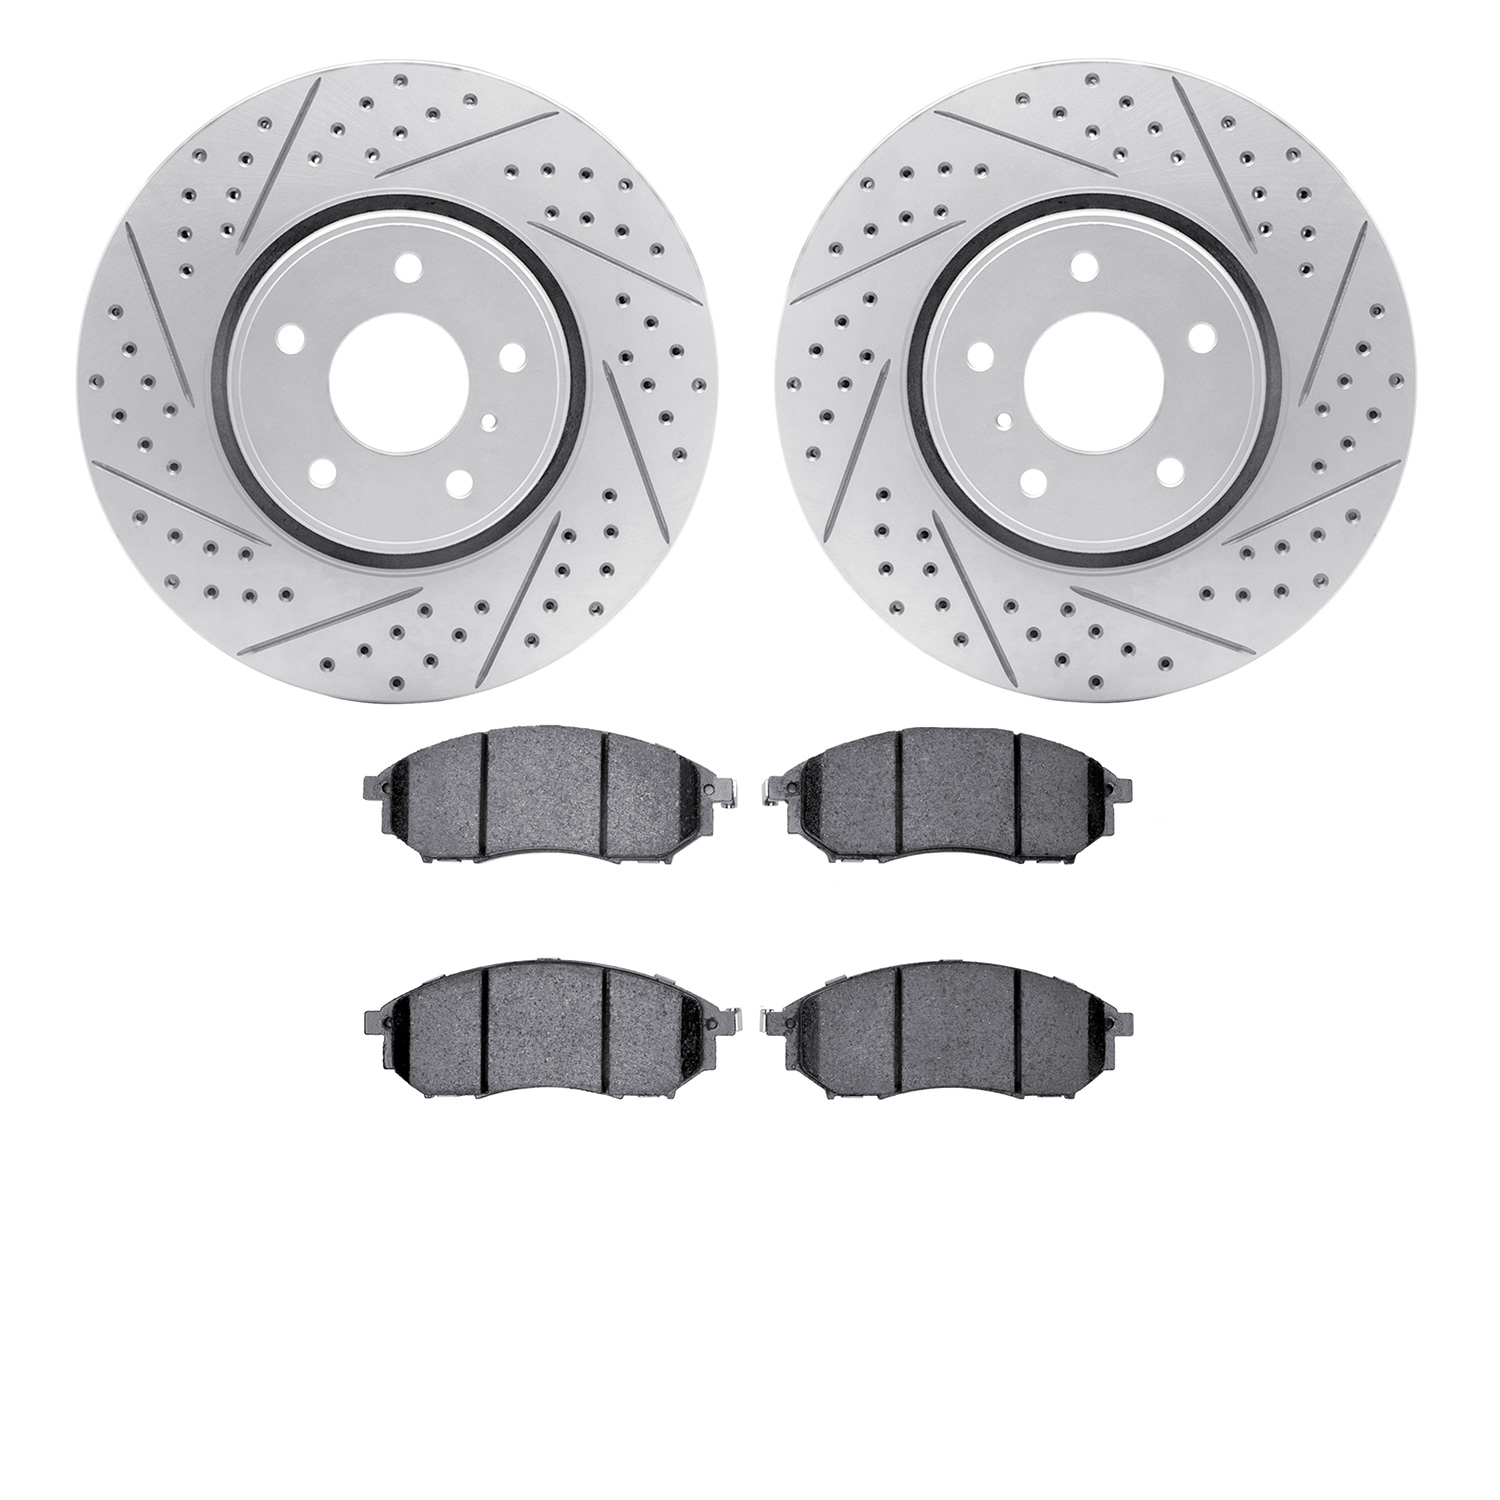 2502-68009 Geoperformance Drilled/Slotted Rotors w/5000 Advanced Brake Pads Kit, 2005-2013 Infiniti/Nissan, Position: Front